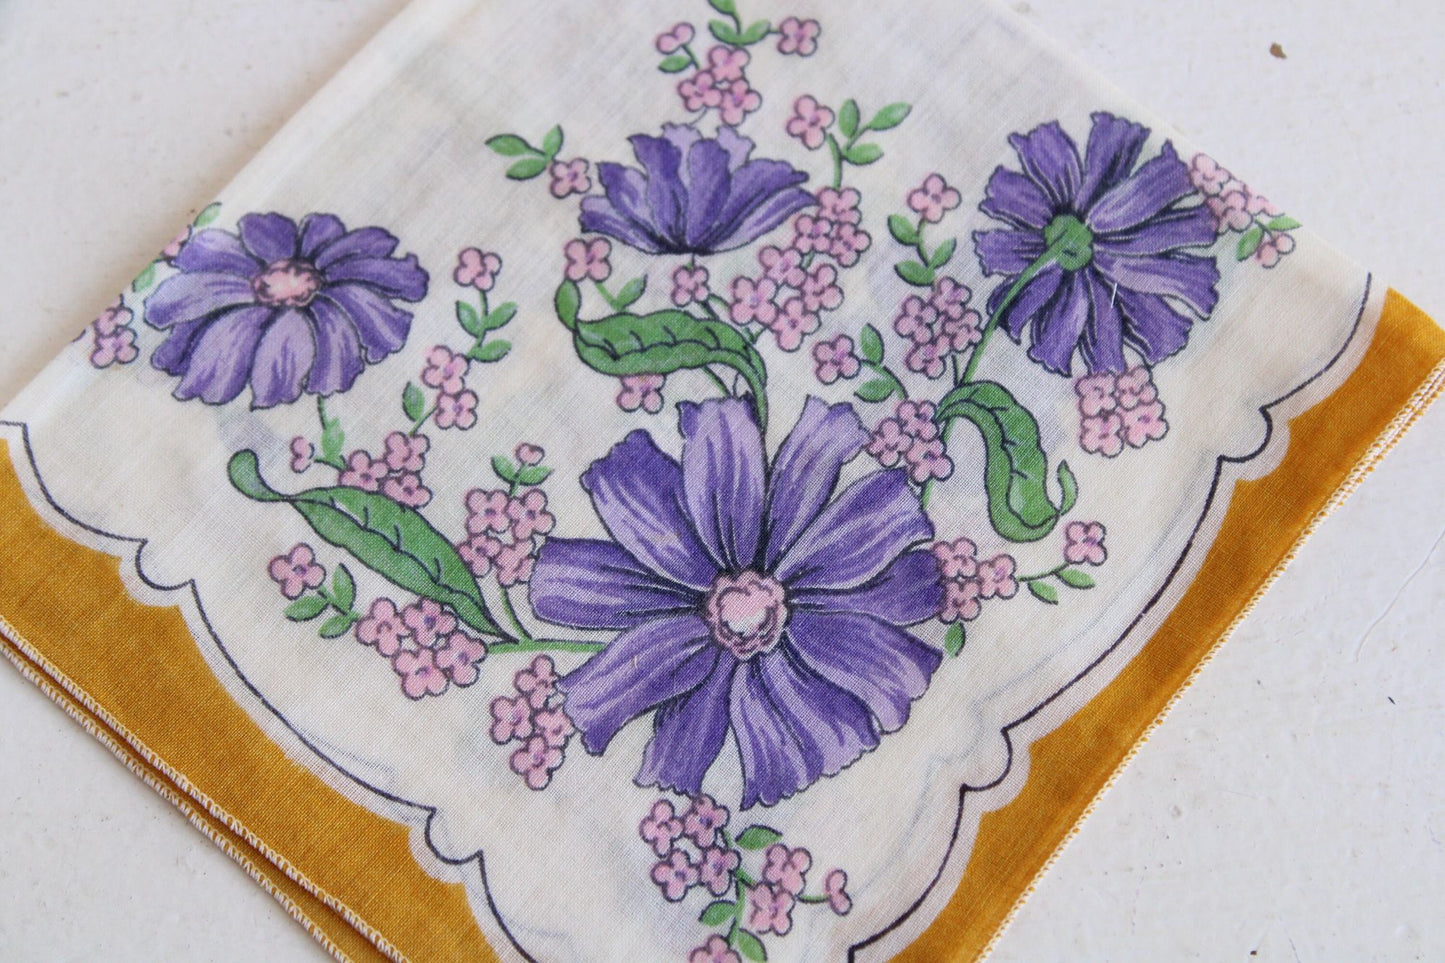 Vintage 1940s 1950s Cotton Handkerchief, Purple with Yellow Floral Print